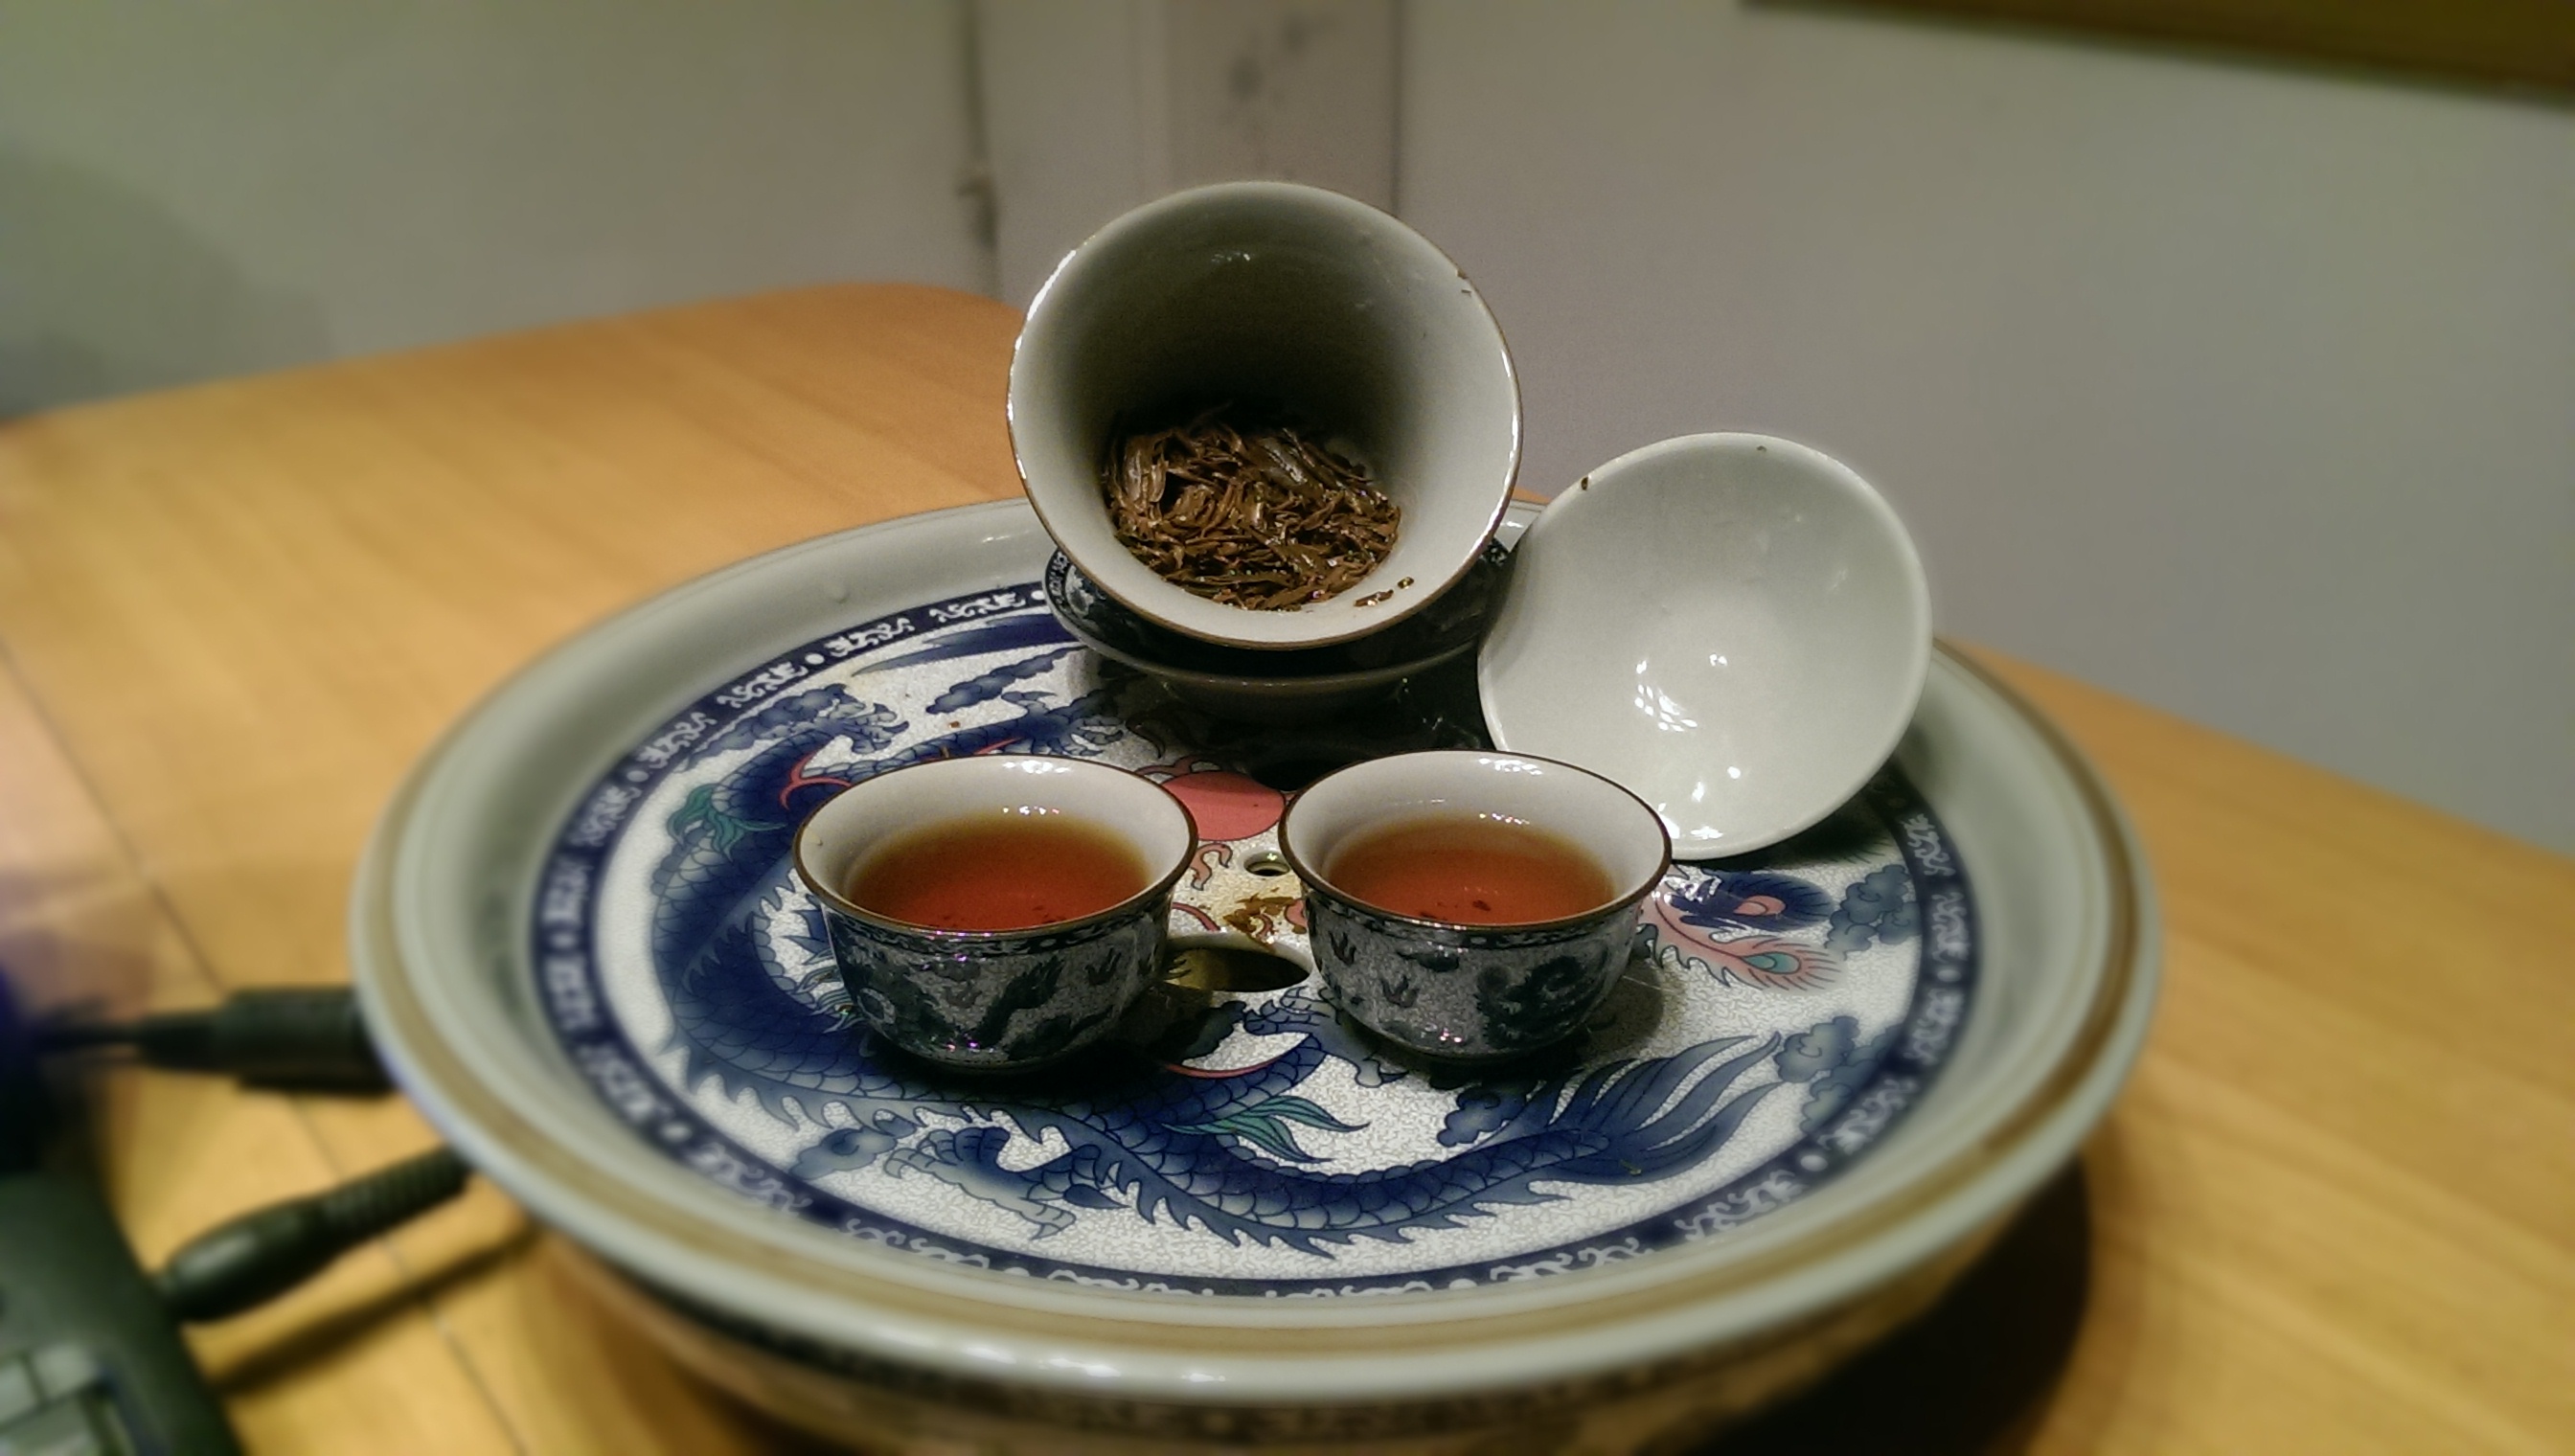 Tonight we are enjoying some red tea.  It has a sharper taste and a darker colour